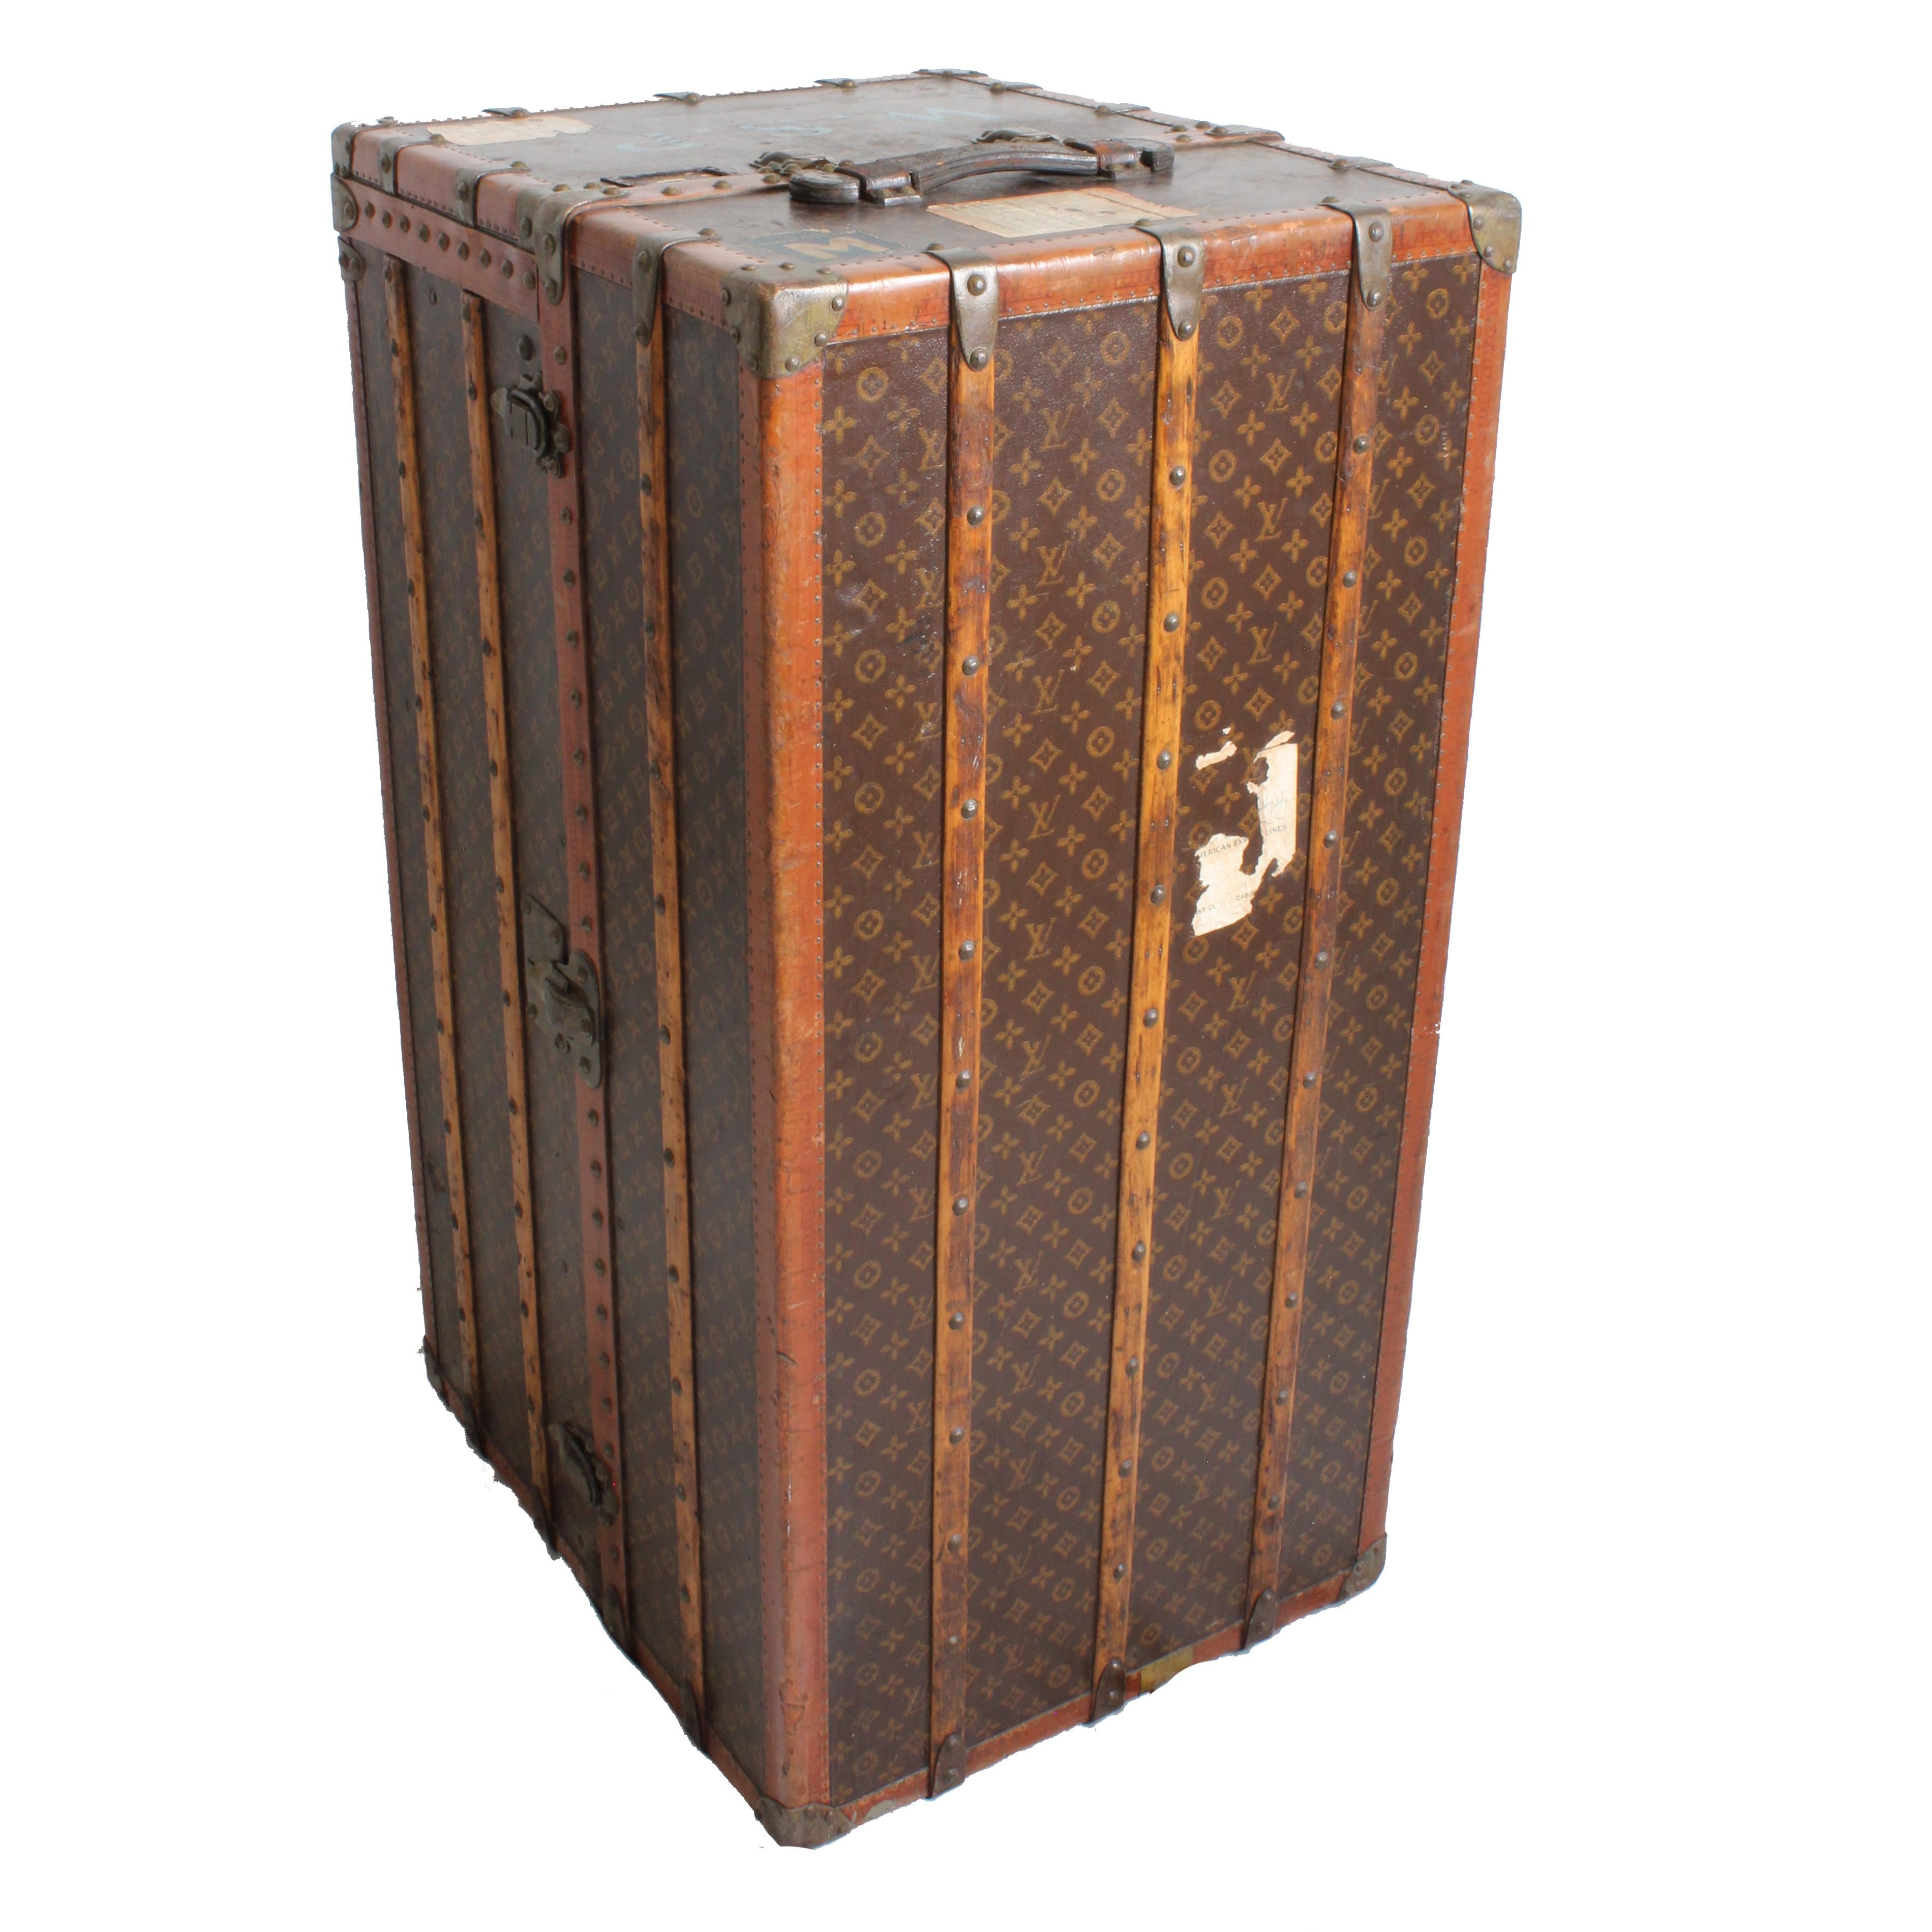 Louis Vuitton Large Wardrobe Steamer Trunk Monogram Travel Case Early 20th C  For Sale 1